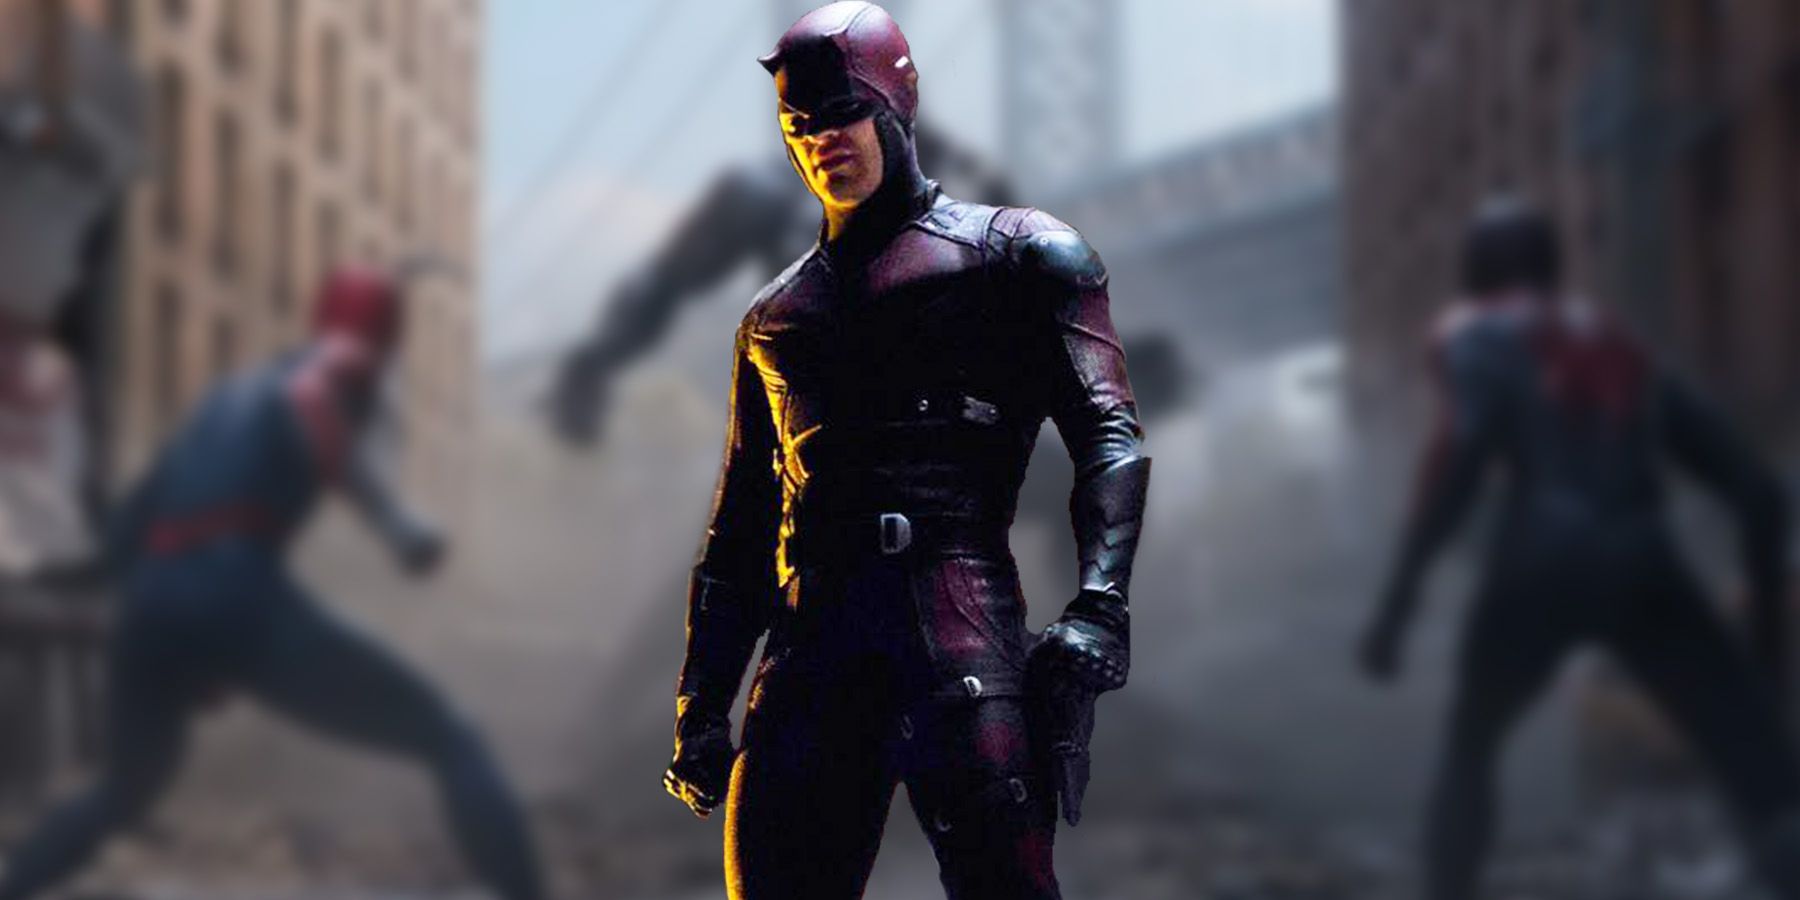 Daredevil may be added to Spider-Man 2 as DLC